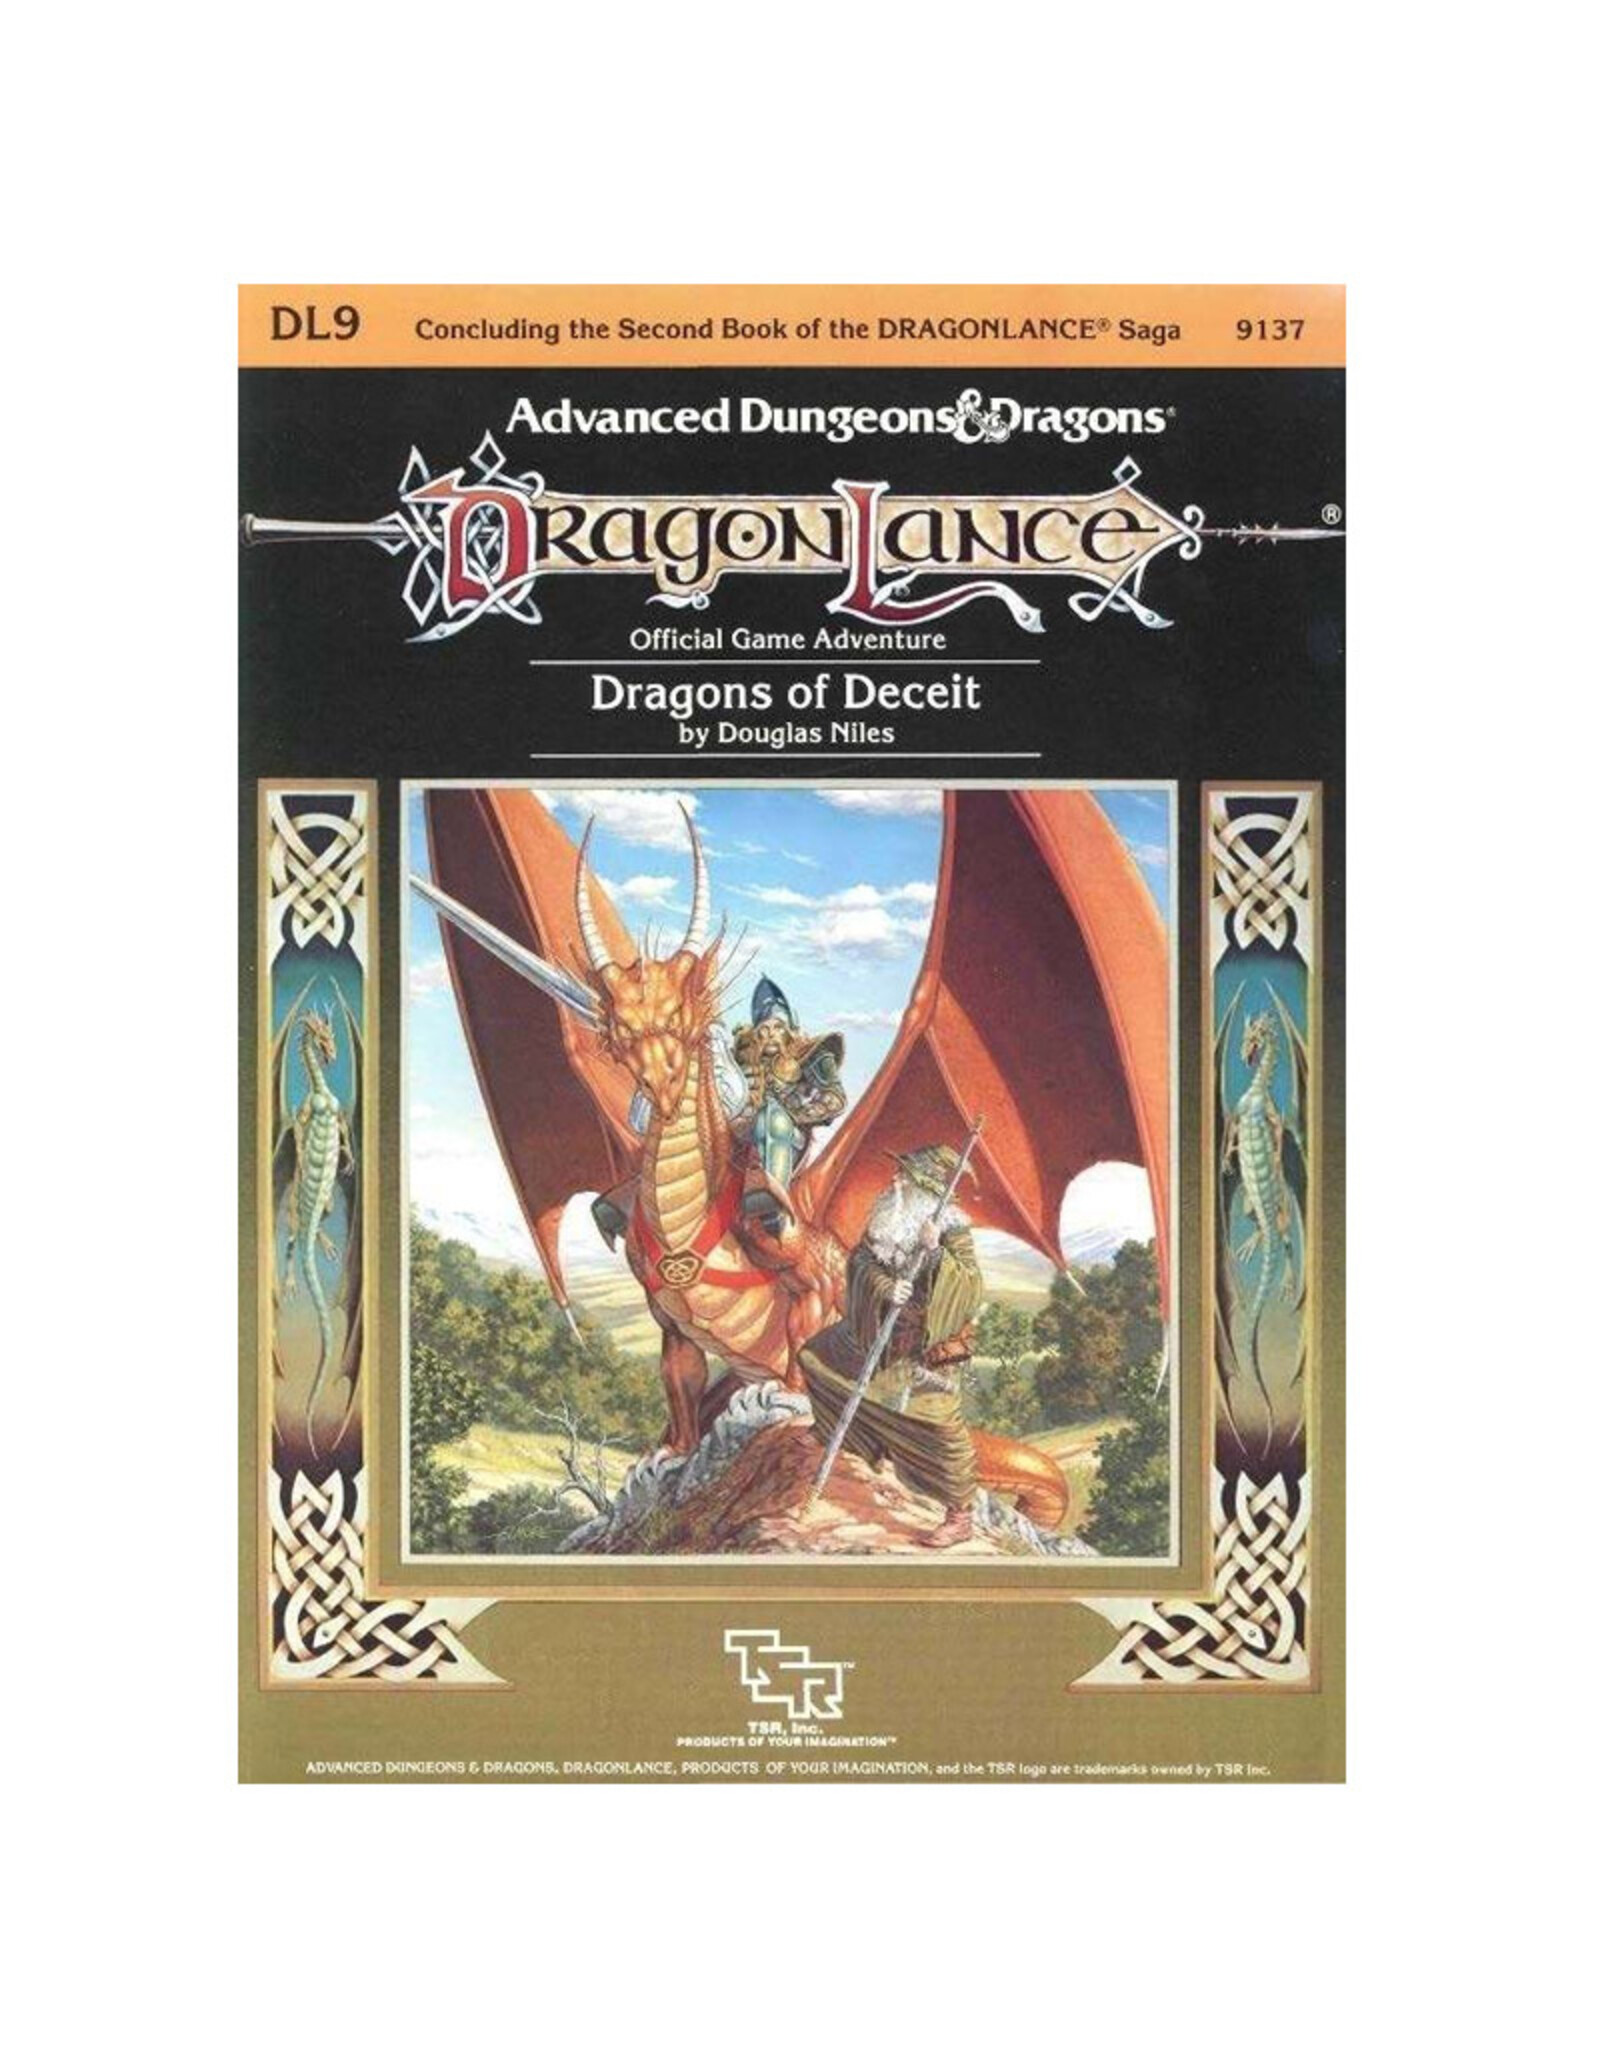 TSR USED - Advanced Dungeons & Dragons Dragon Lance: Dragons of Deceit DL9